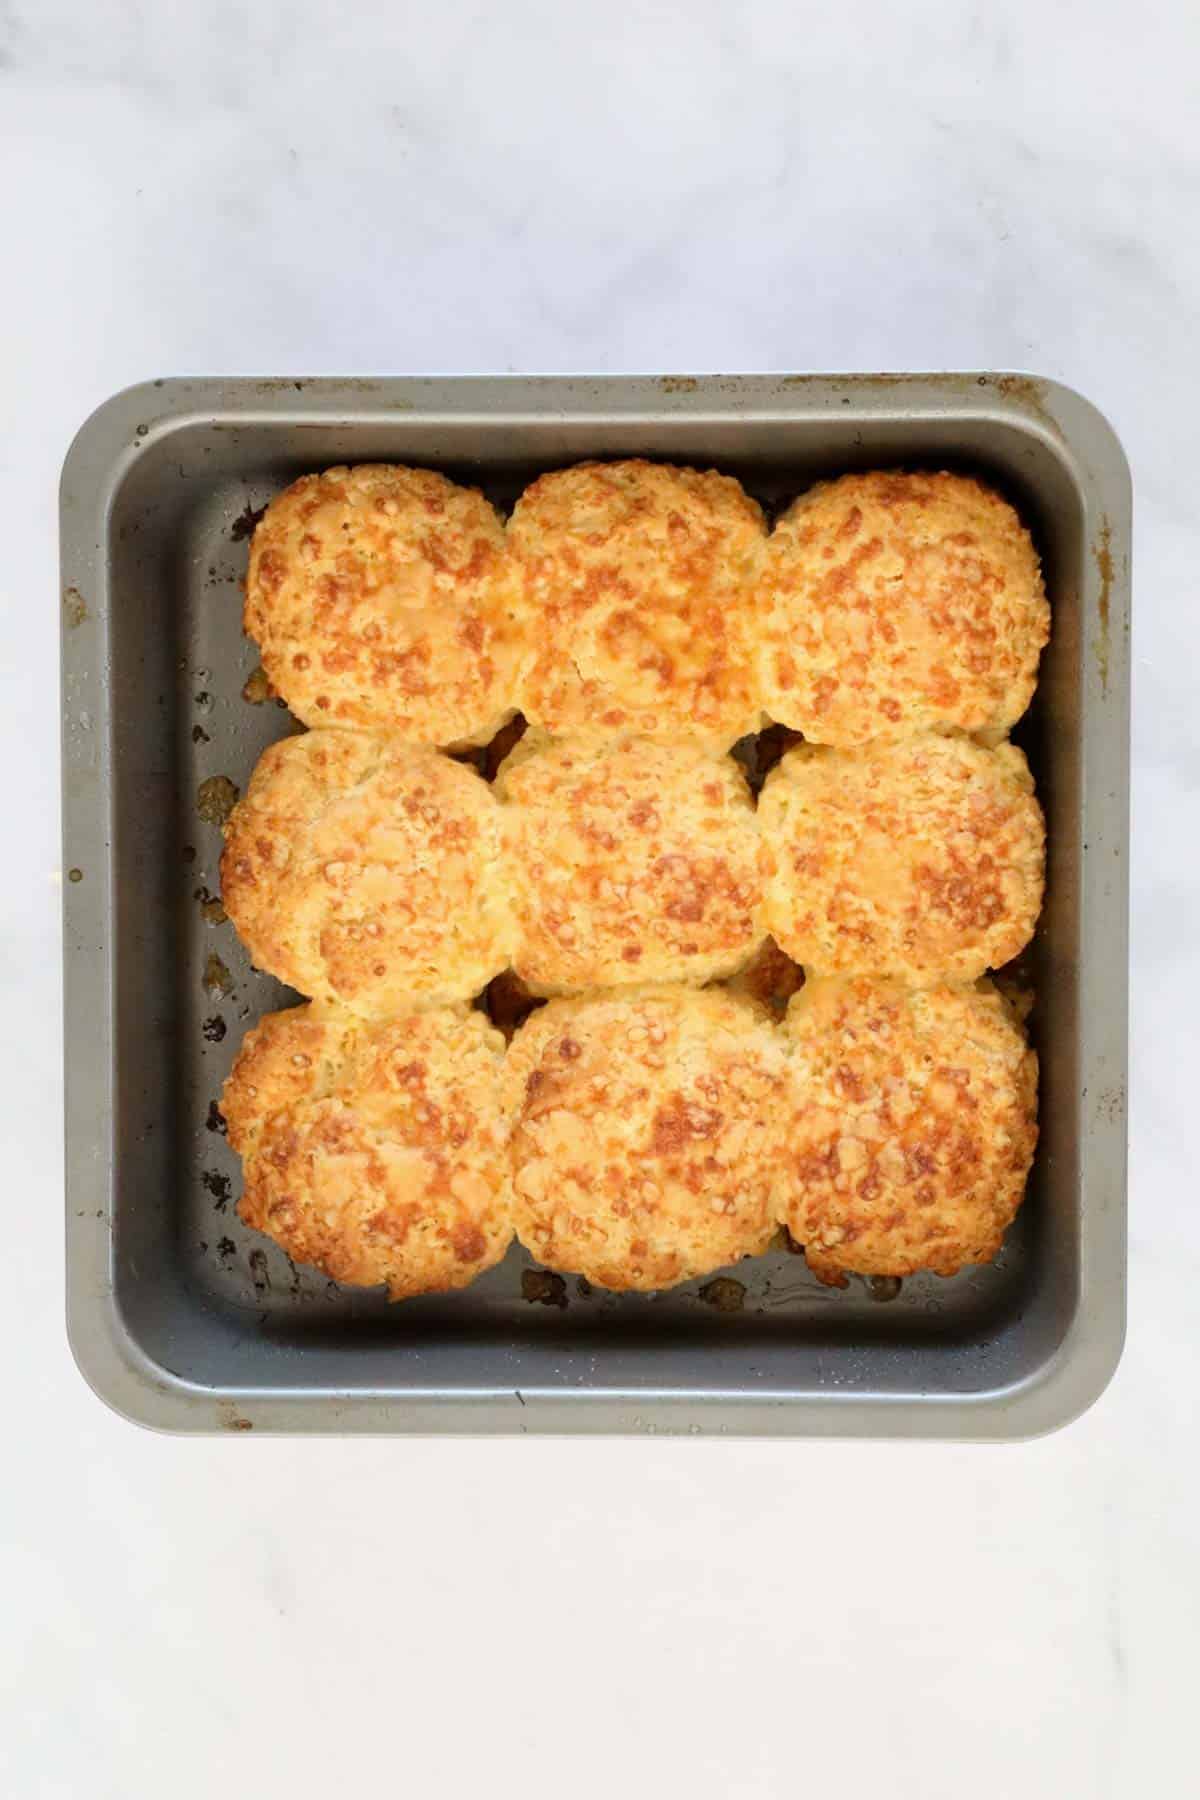 Baked scones with crispy baked cheese on top, in a square baking tin.